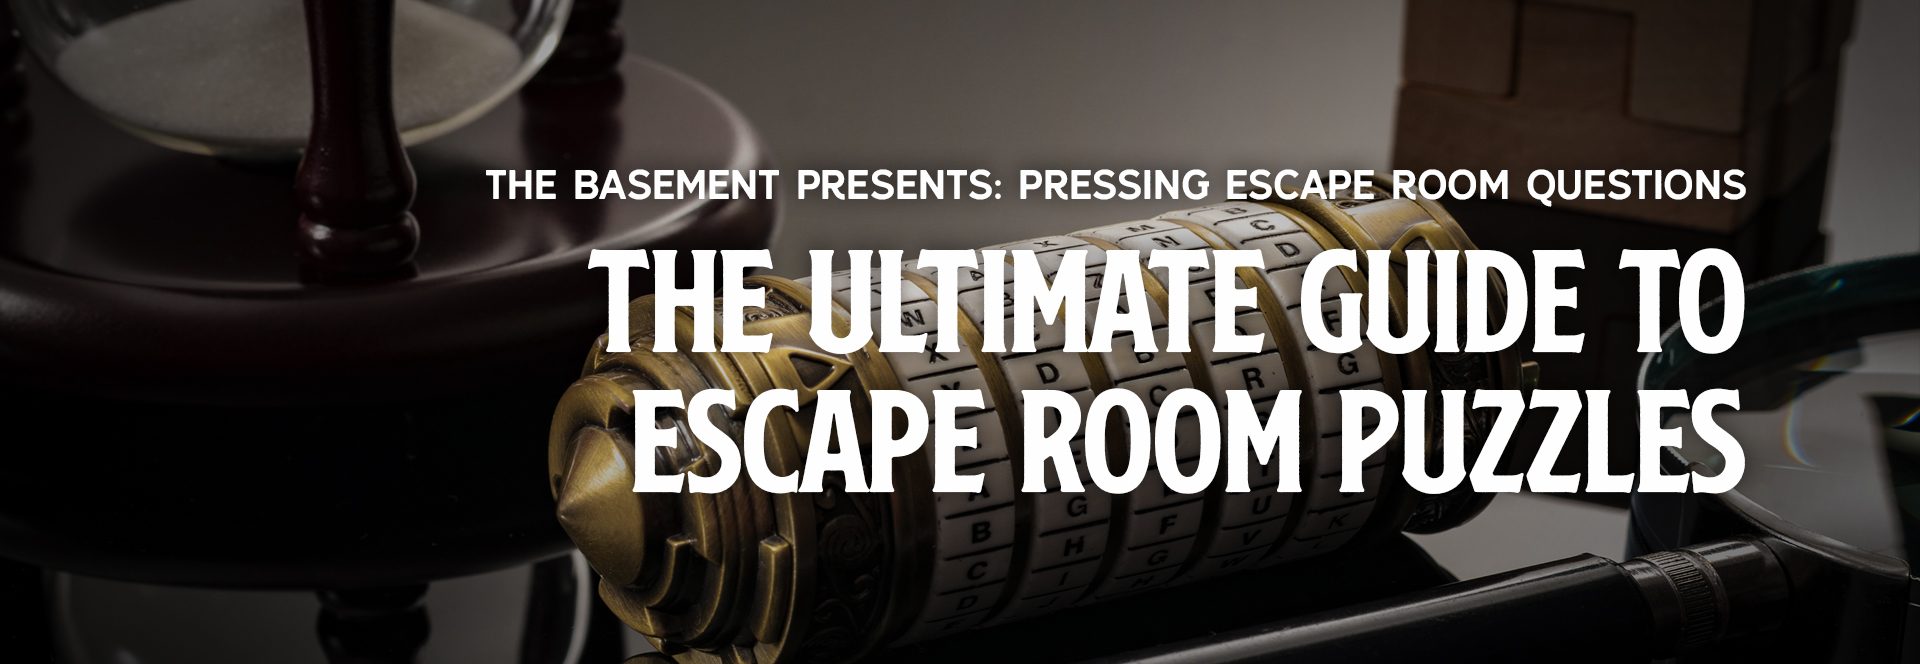 The Ultimate Guide To Escape Room Puzzles